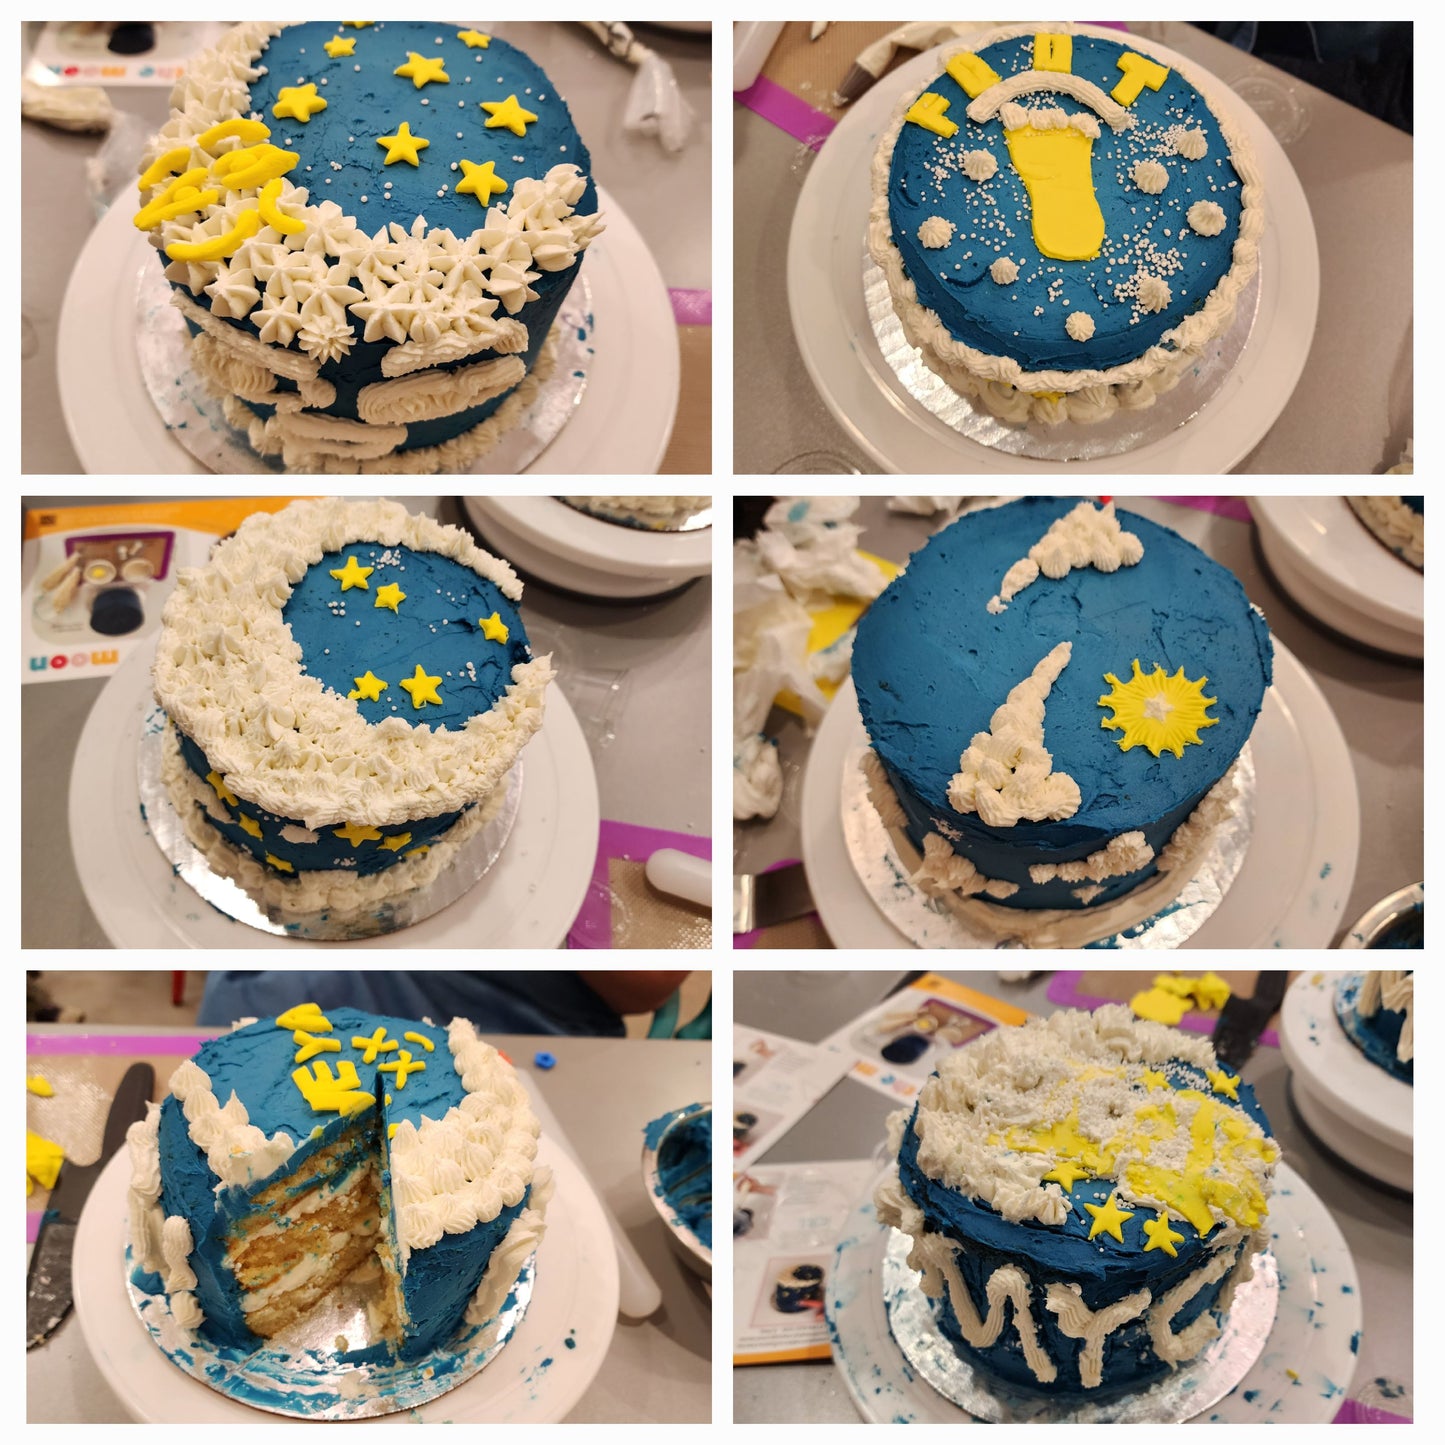 6 moon cakes decorated during an in-studio party, with dark blue frosting around the cakes, white frosting stars piped in the shape of a crescent moon, and small yellow stars and other fondant detail placed around the cakes